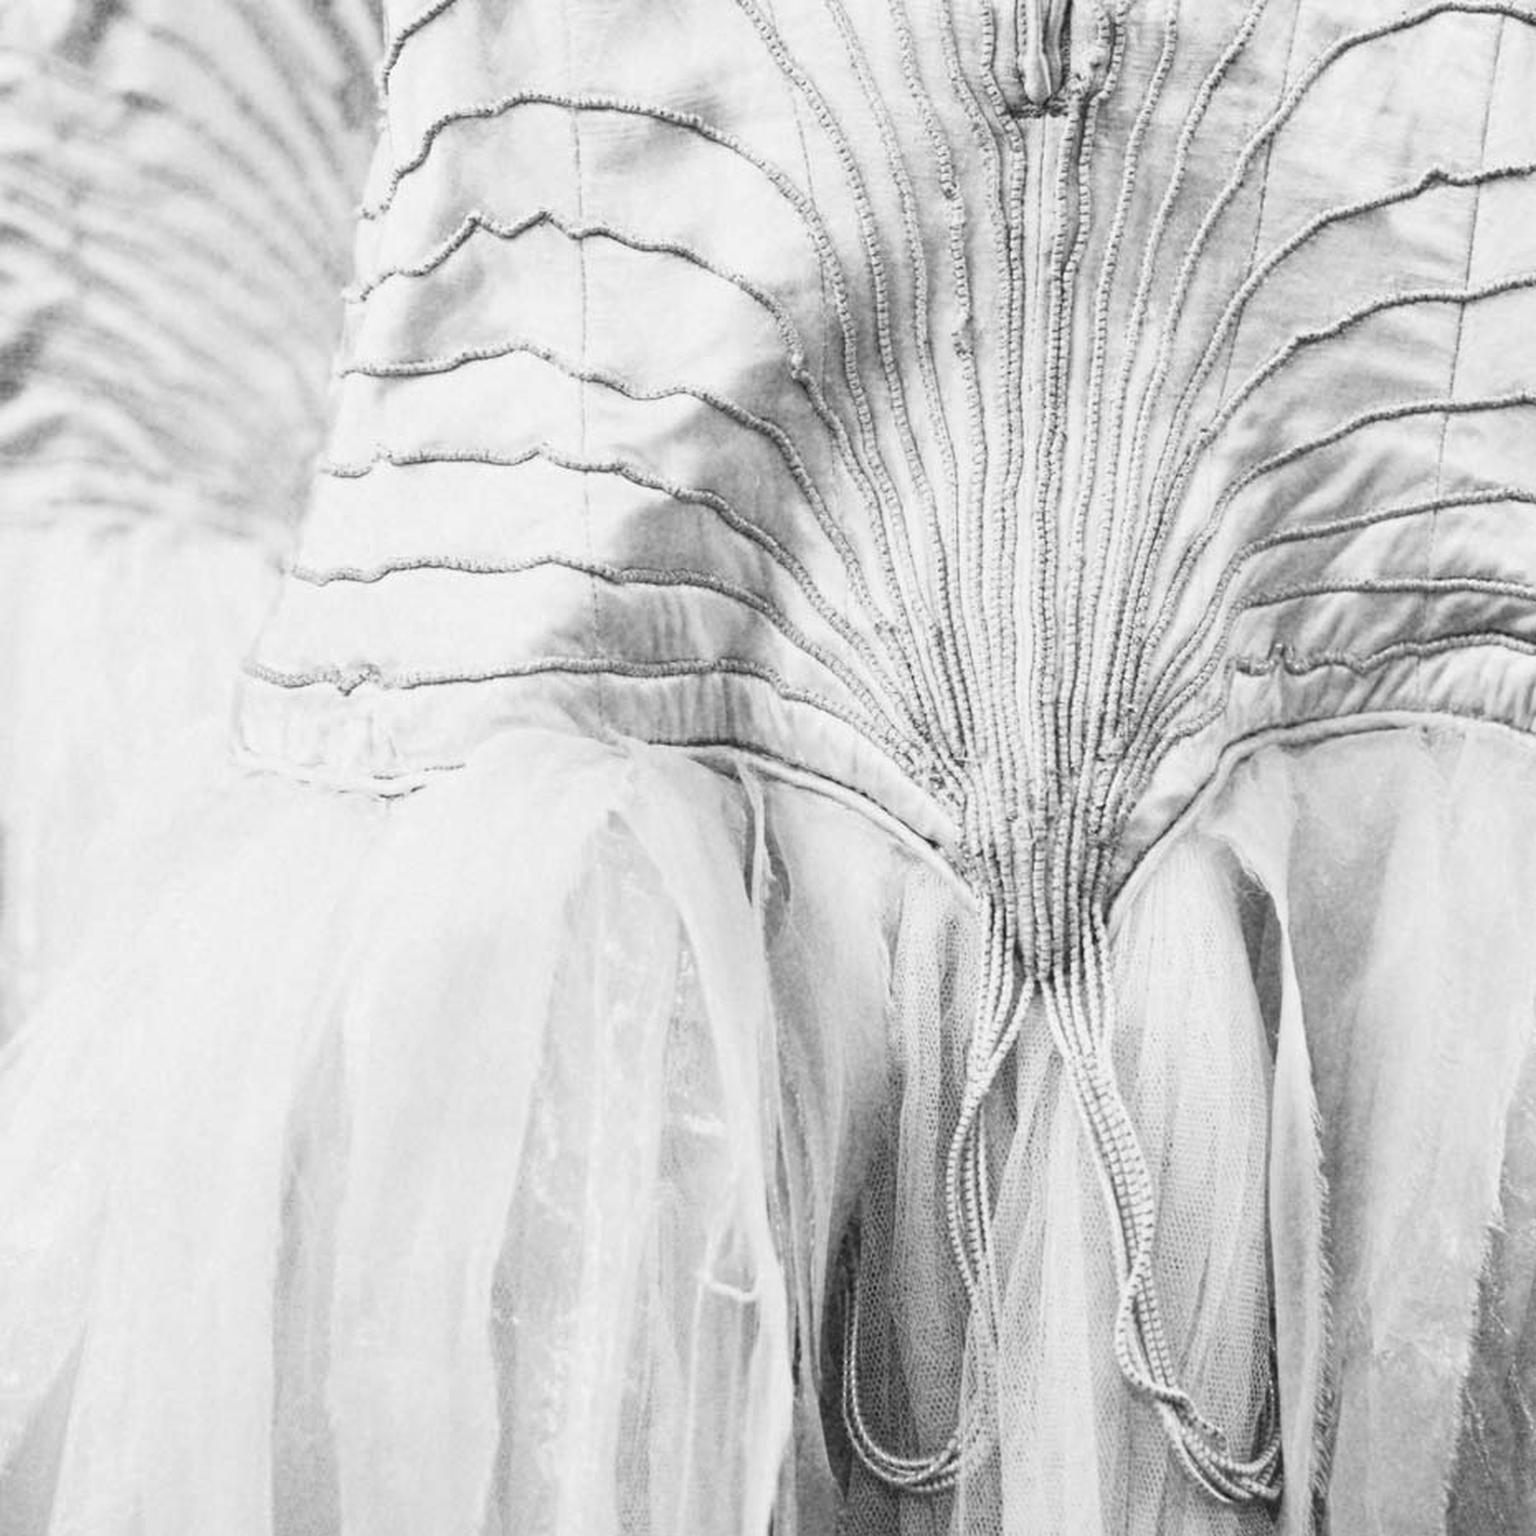 Silk and tulle costumes for the swans in Swan Lake. Image: Charlie Dailey